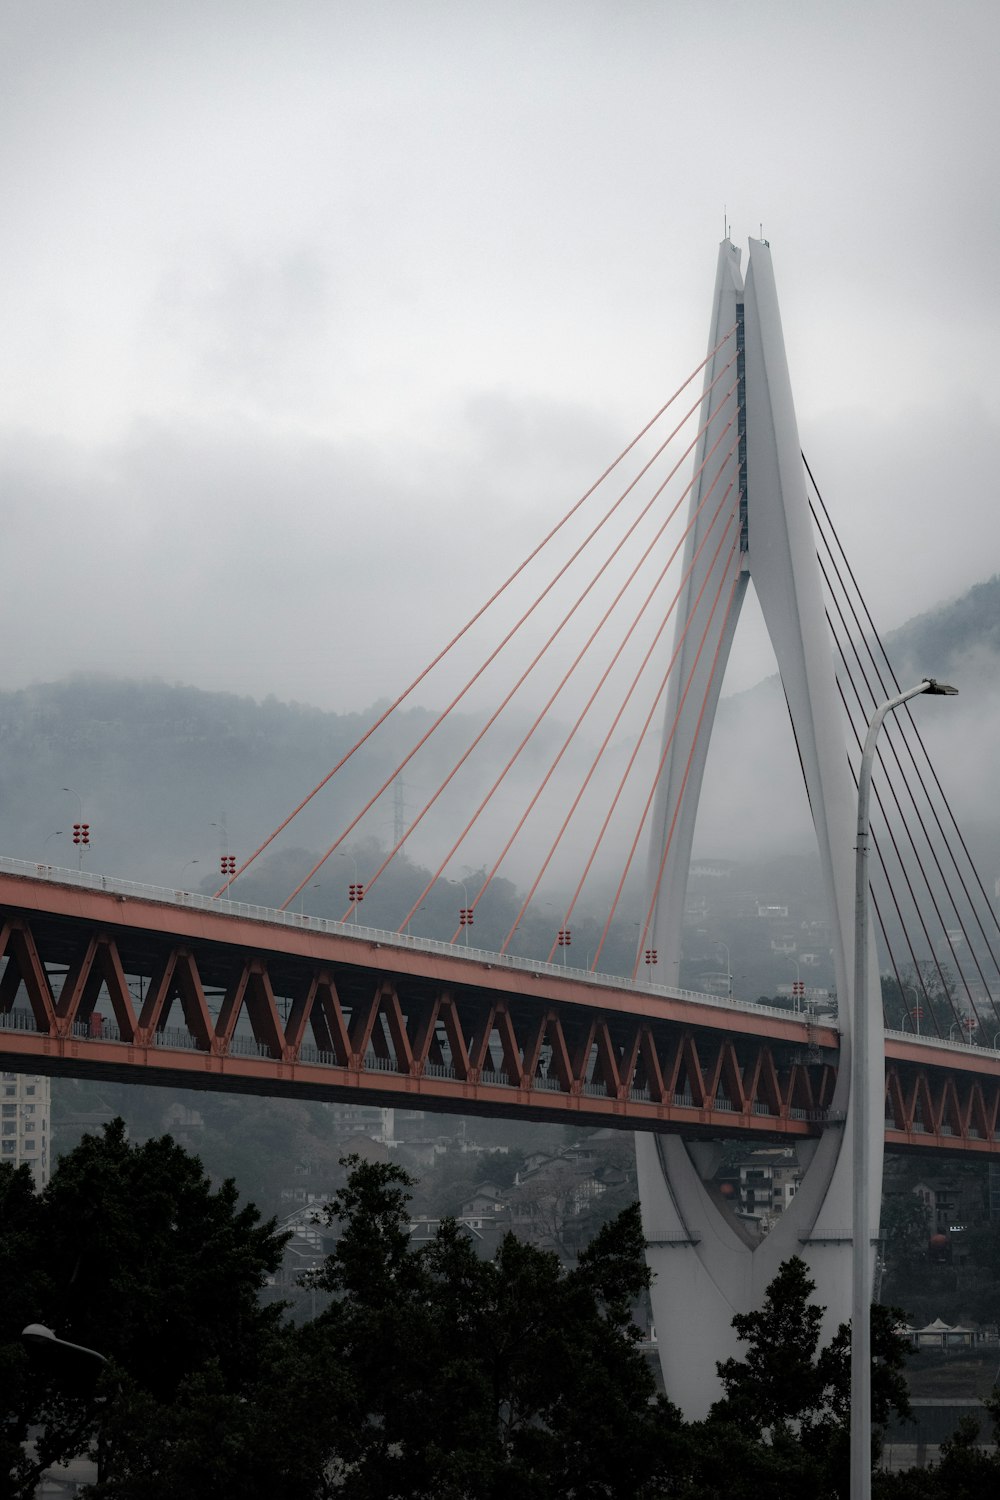 a large bridge spanning over a city with mountains in the background